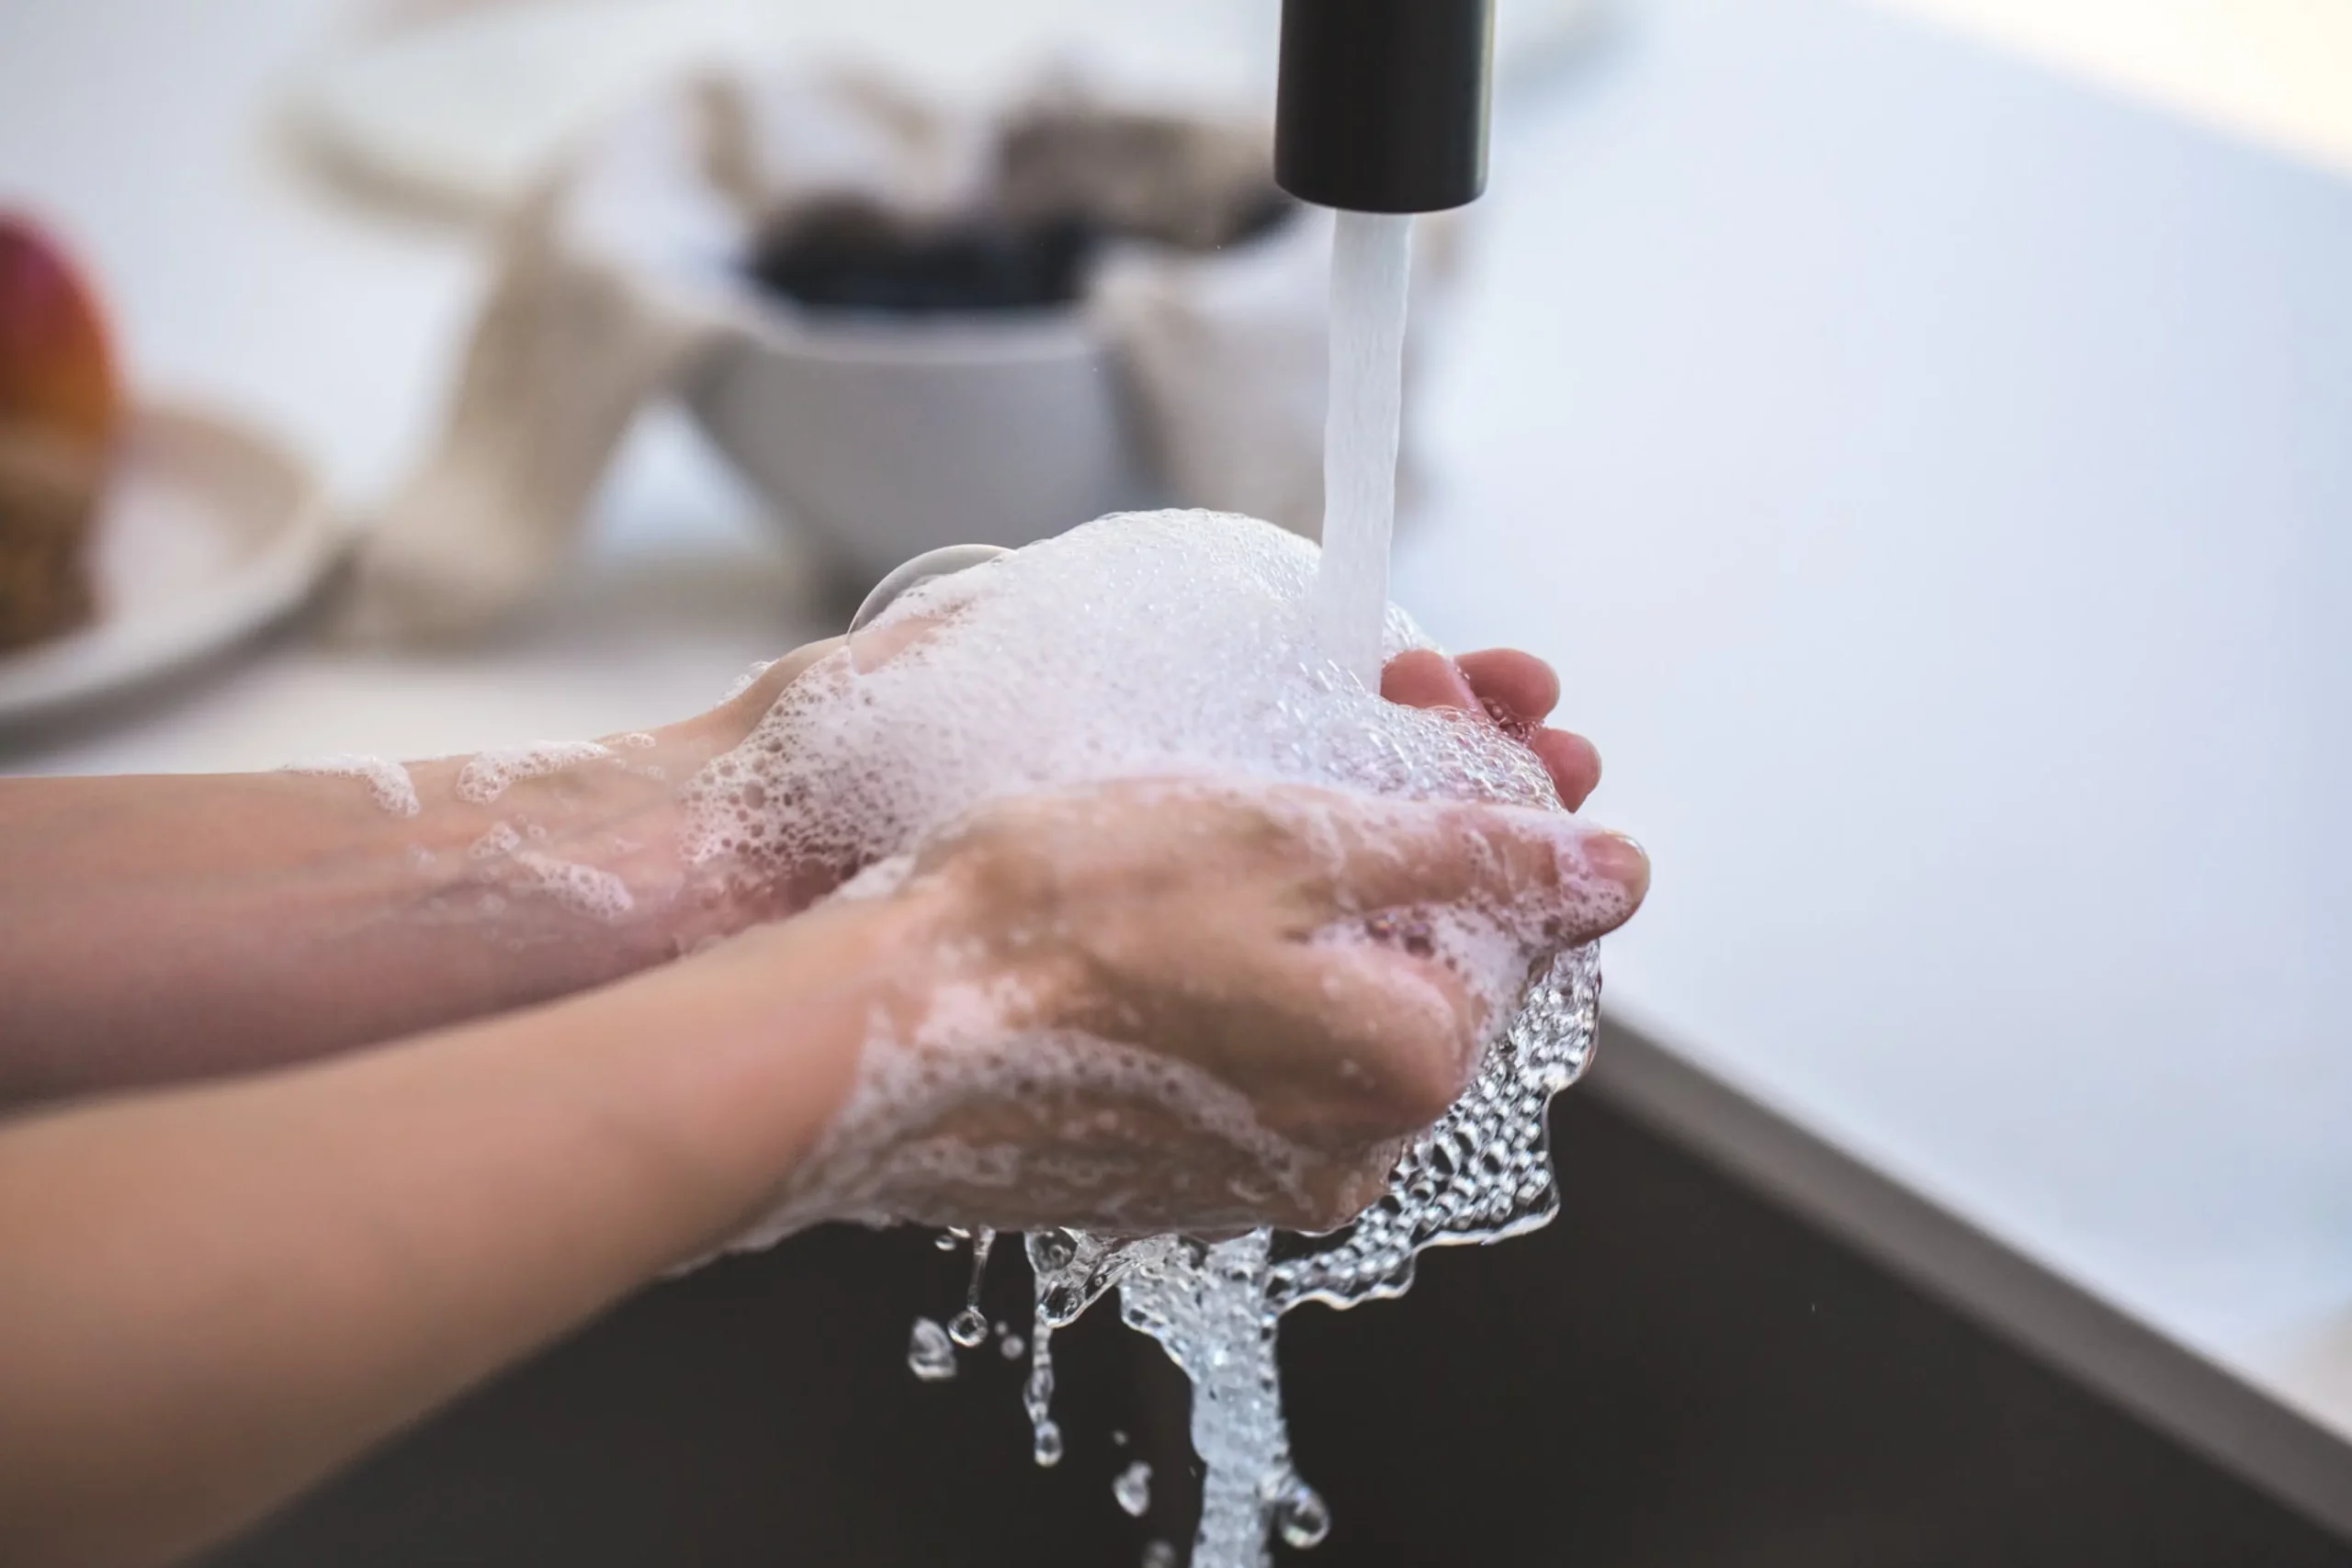 photo of someone washing their hands with suds